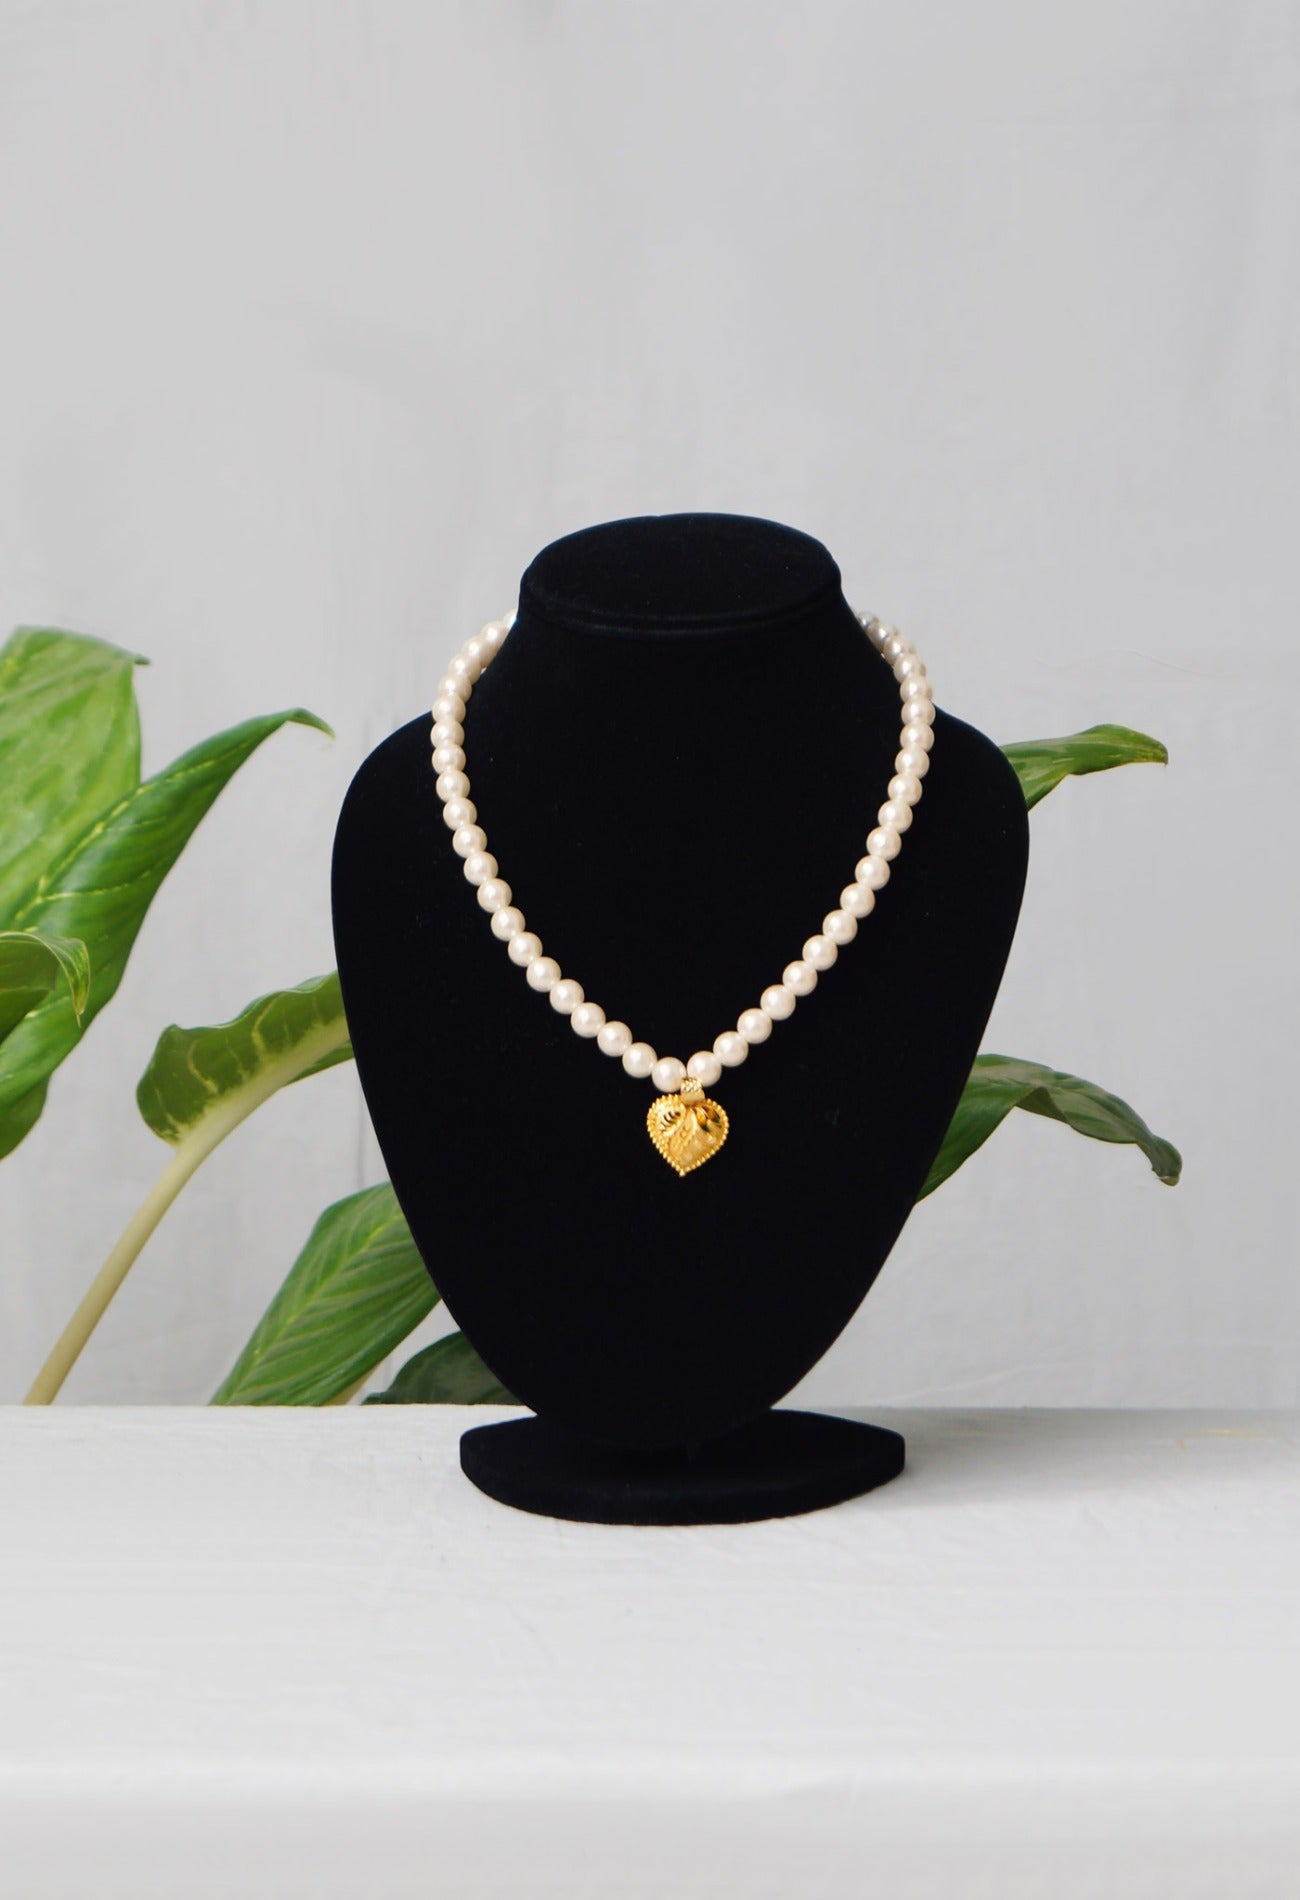 Online Shopping for White Amravati Pearls Necklace with jewellery from Andhra Pradesh at Unnatisilks.com India
